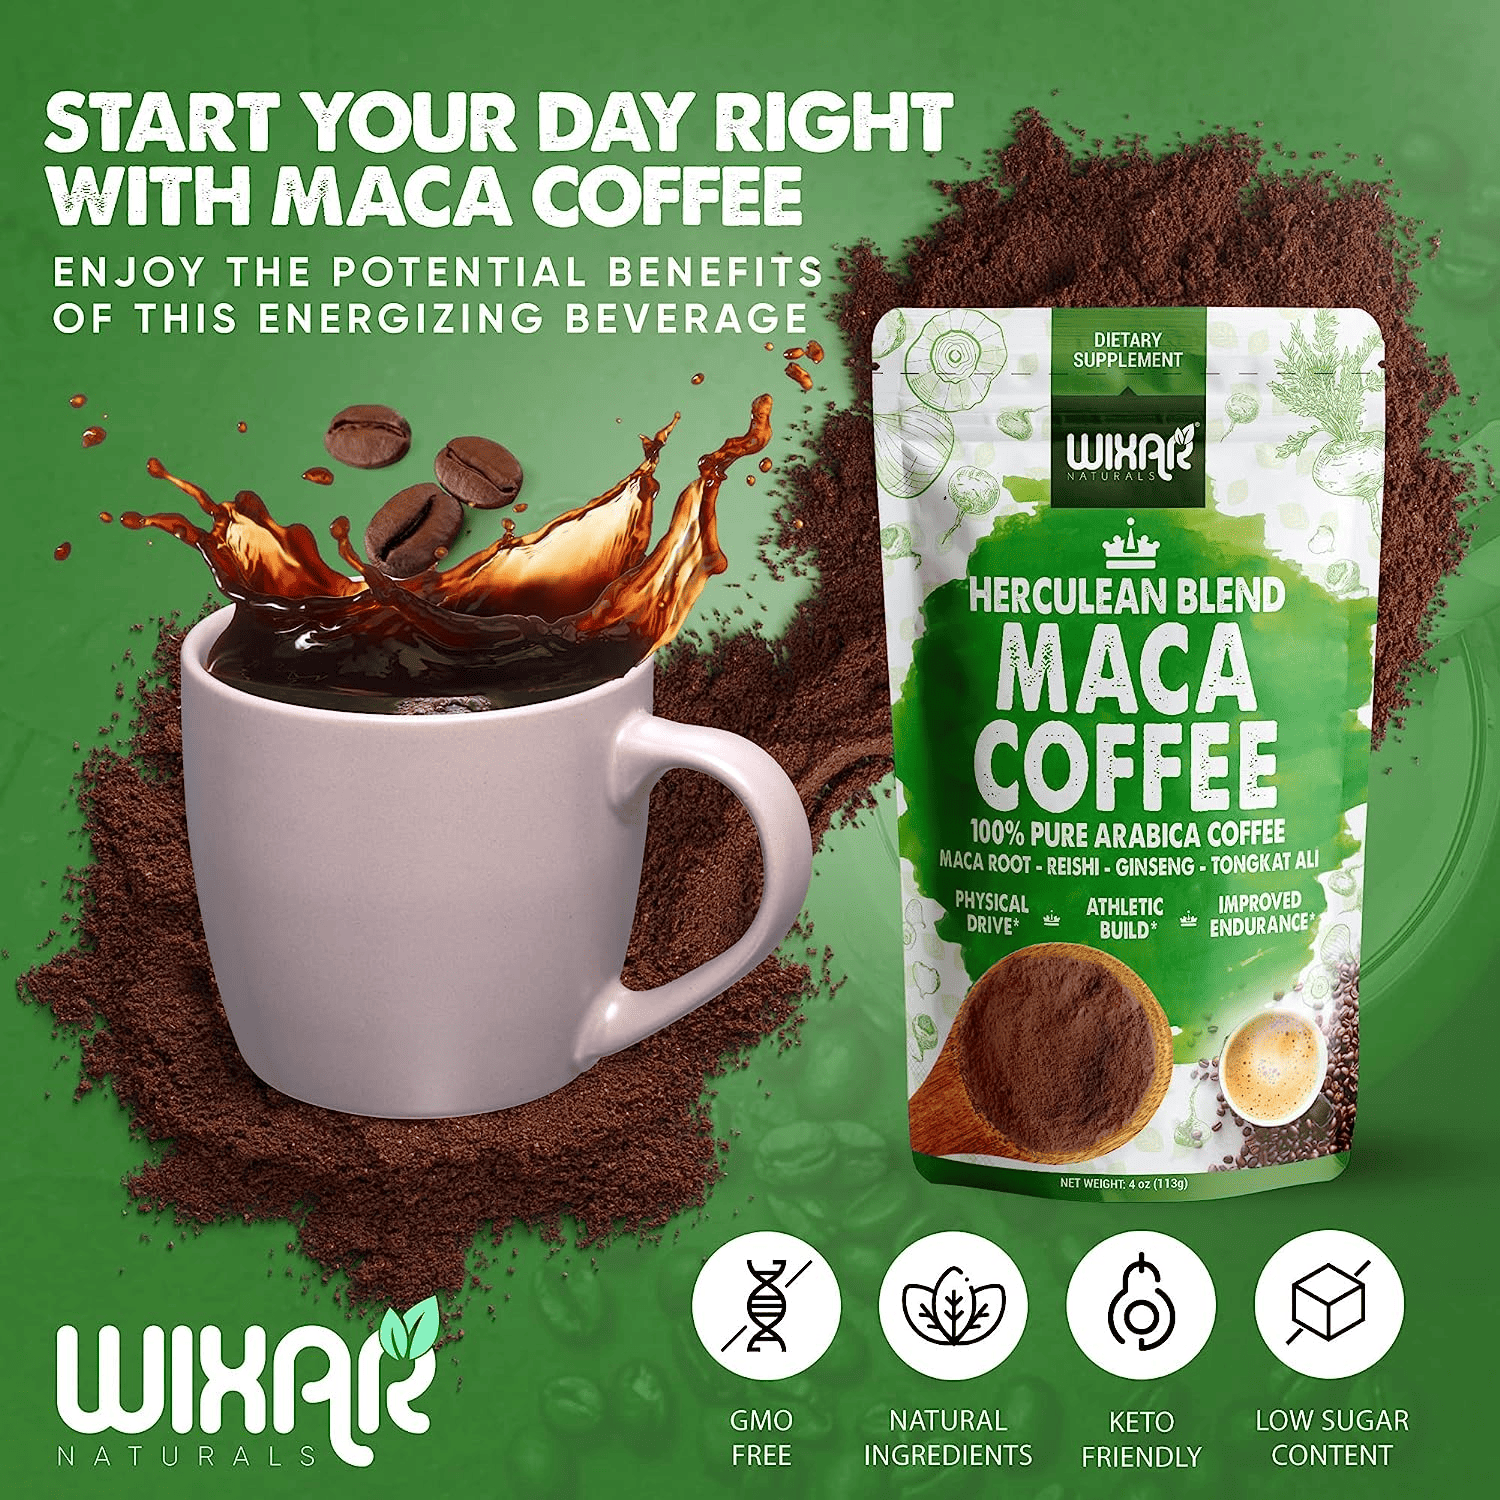 A cup of Maca Coffee with maca root powder, cacao powder and coffee beans, showing how to incorporate Maca into daily routine